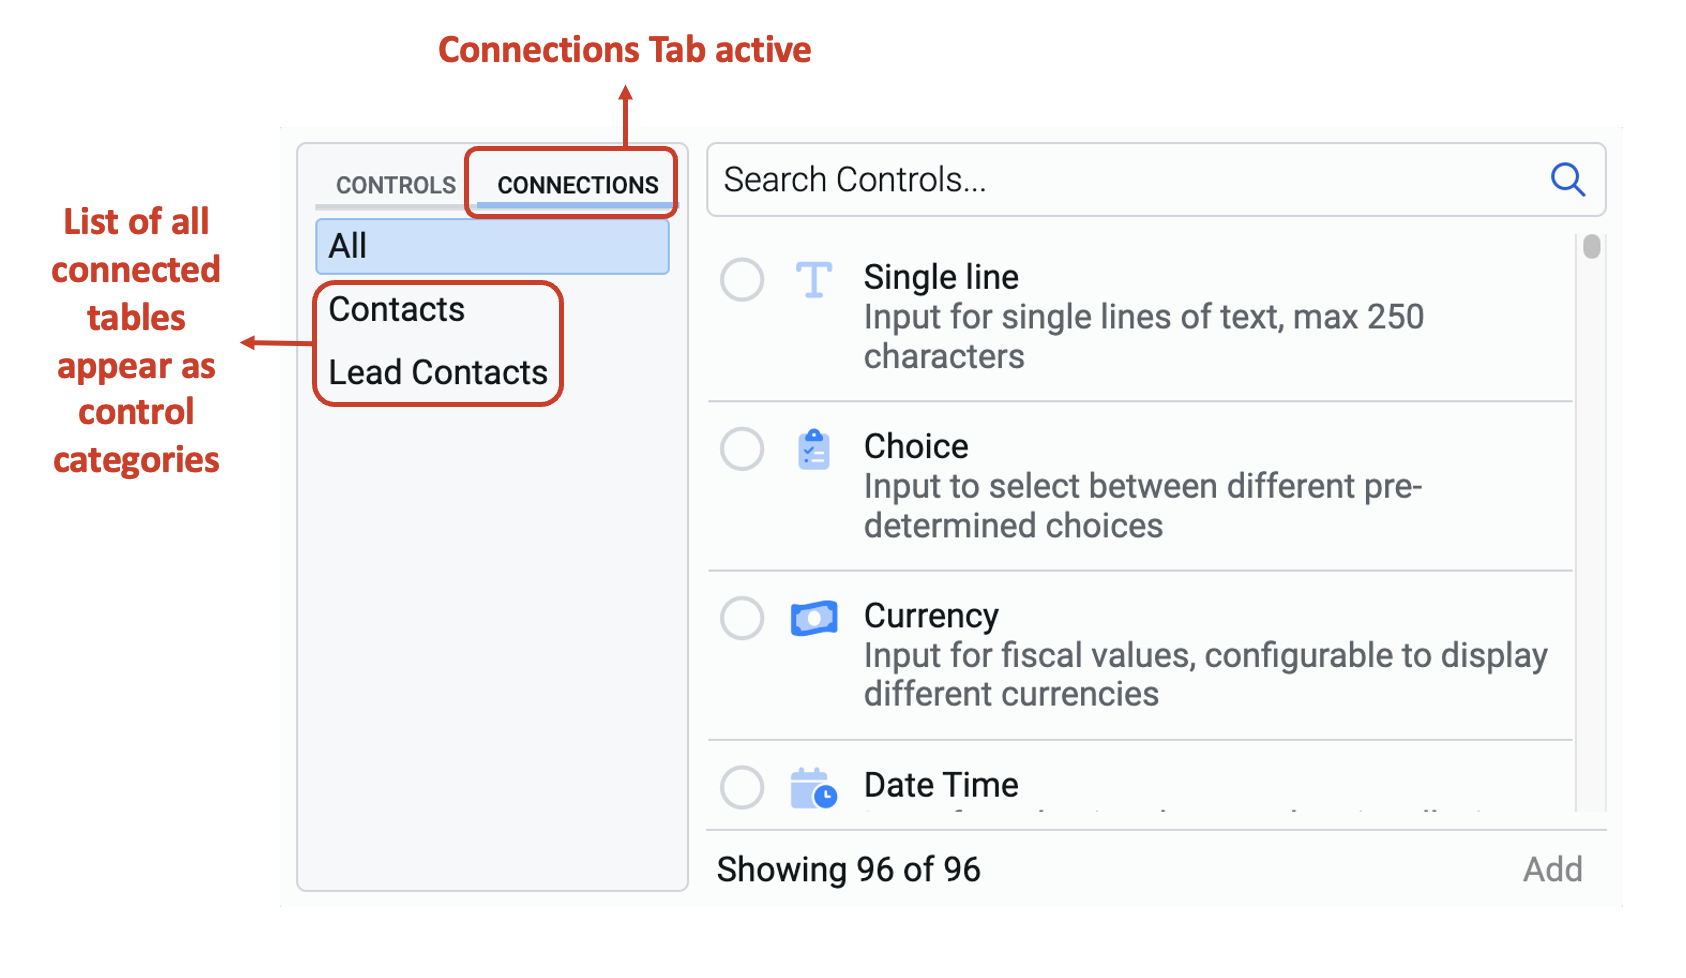 Image showing categories in Connections tab